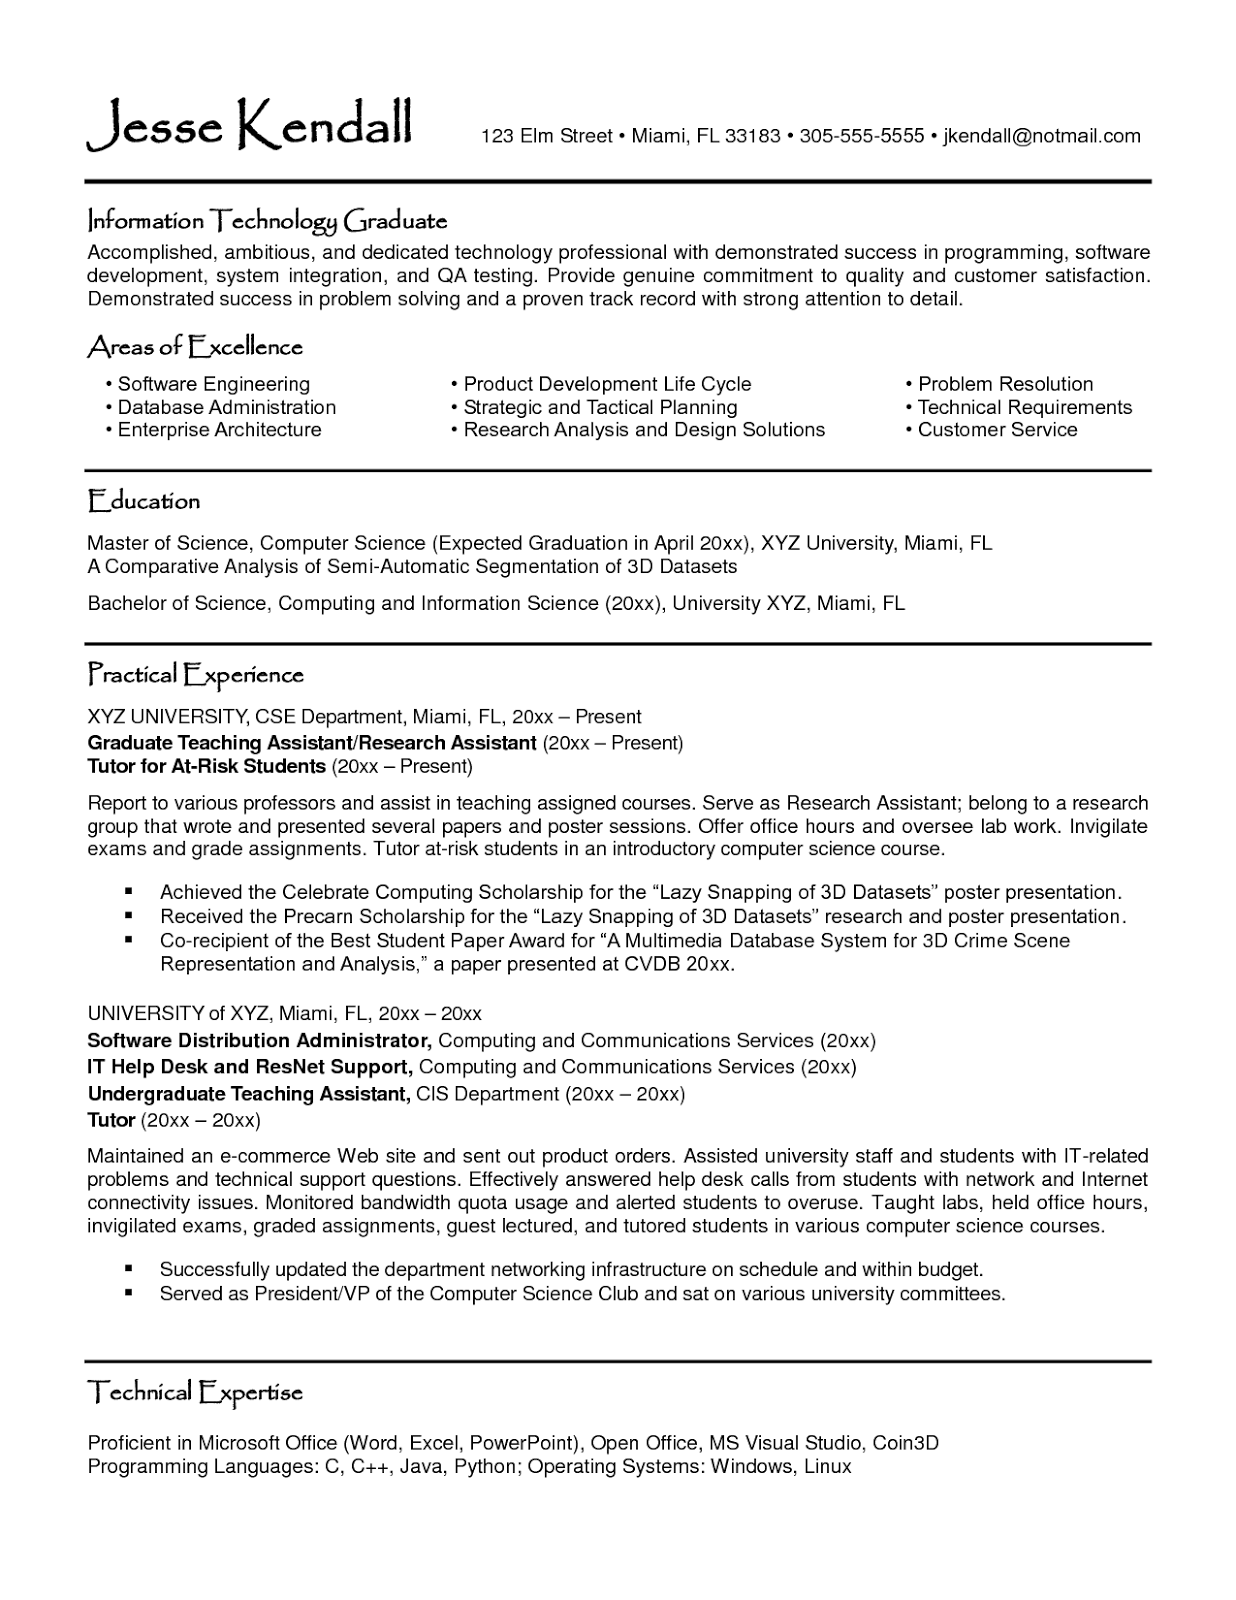 Corporate lawyer resume example